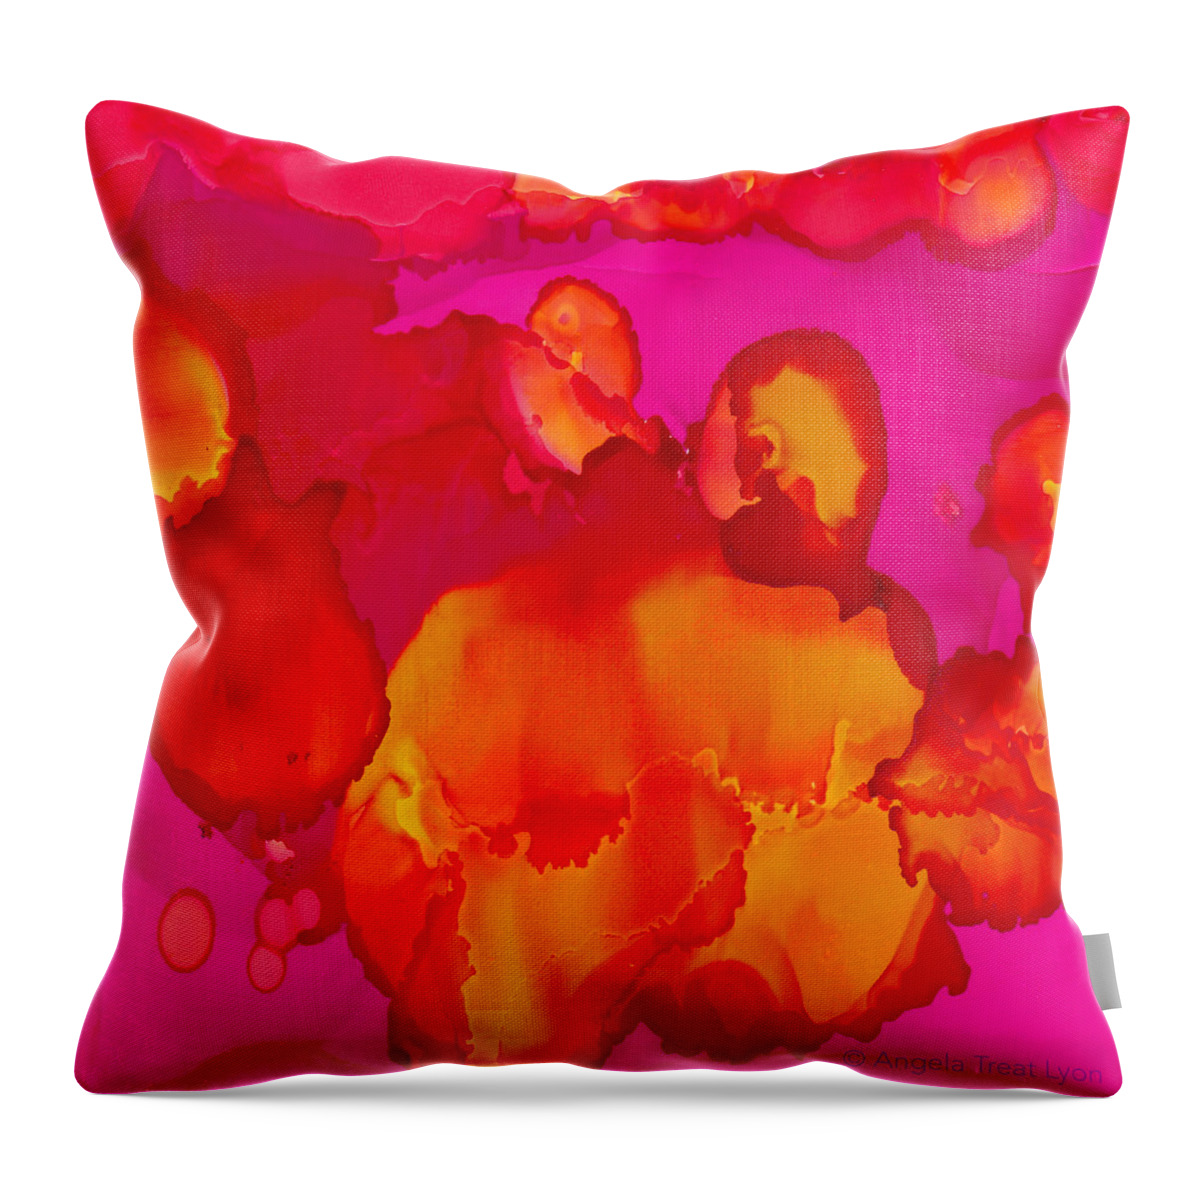 Tropical Throw Pillow featuring the painting Inner Earth by Angela Treat Lyon